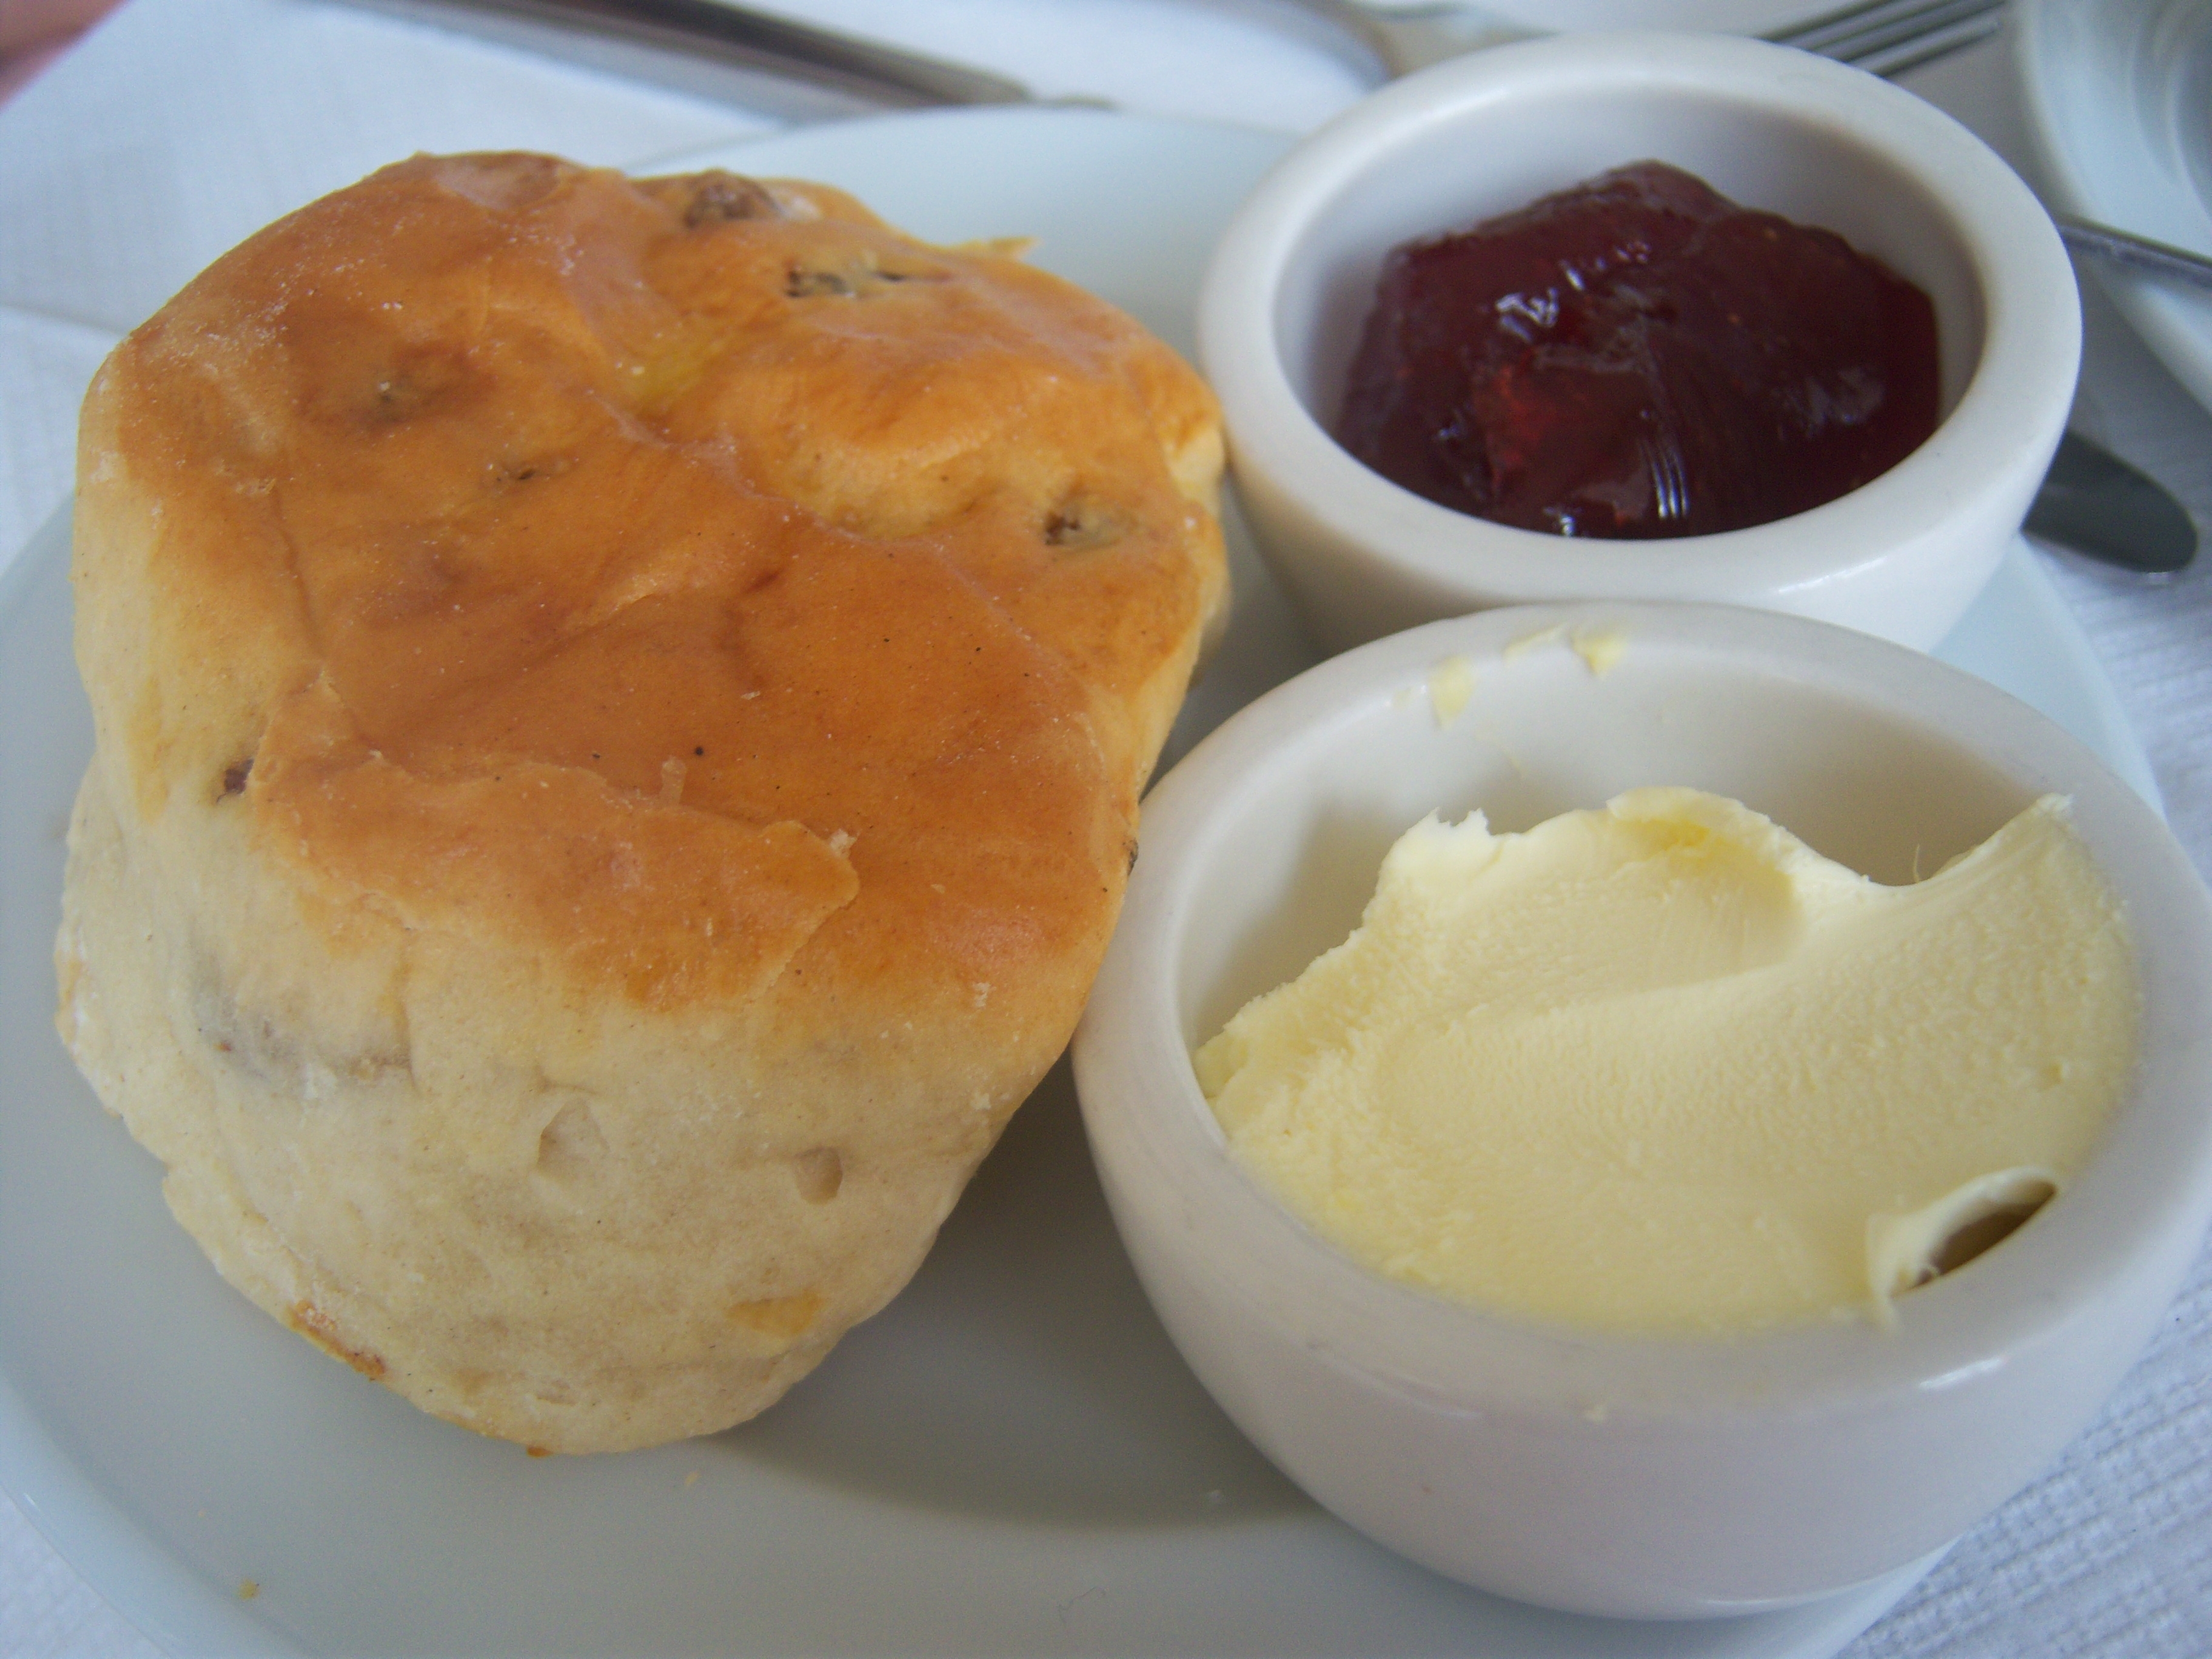 Scone with Jam and Clotted Cream